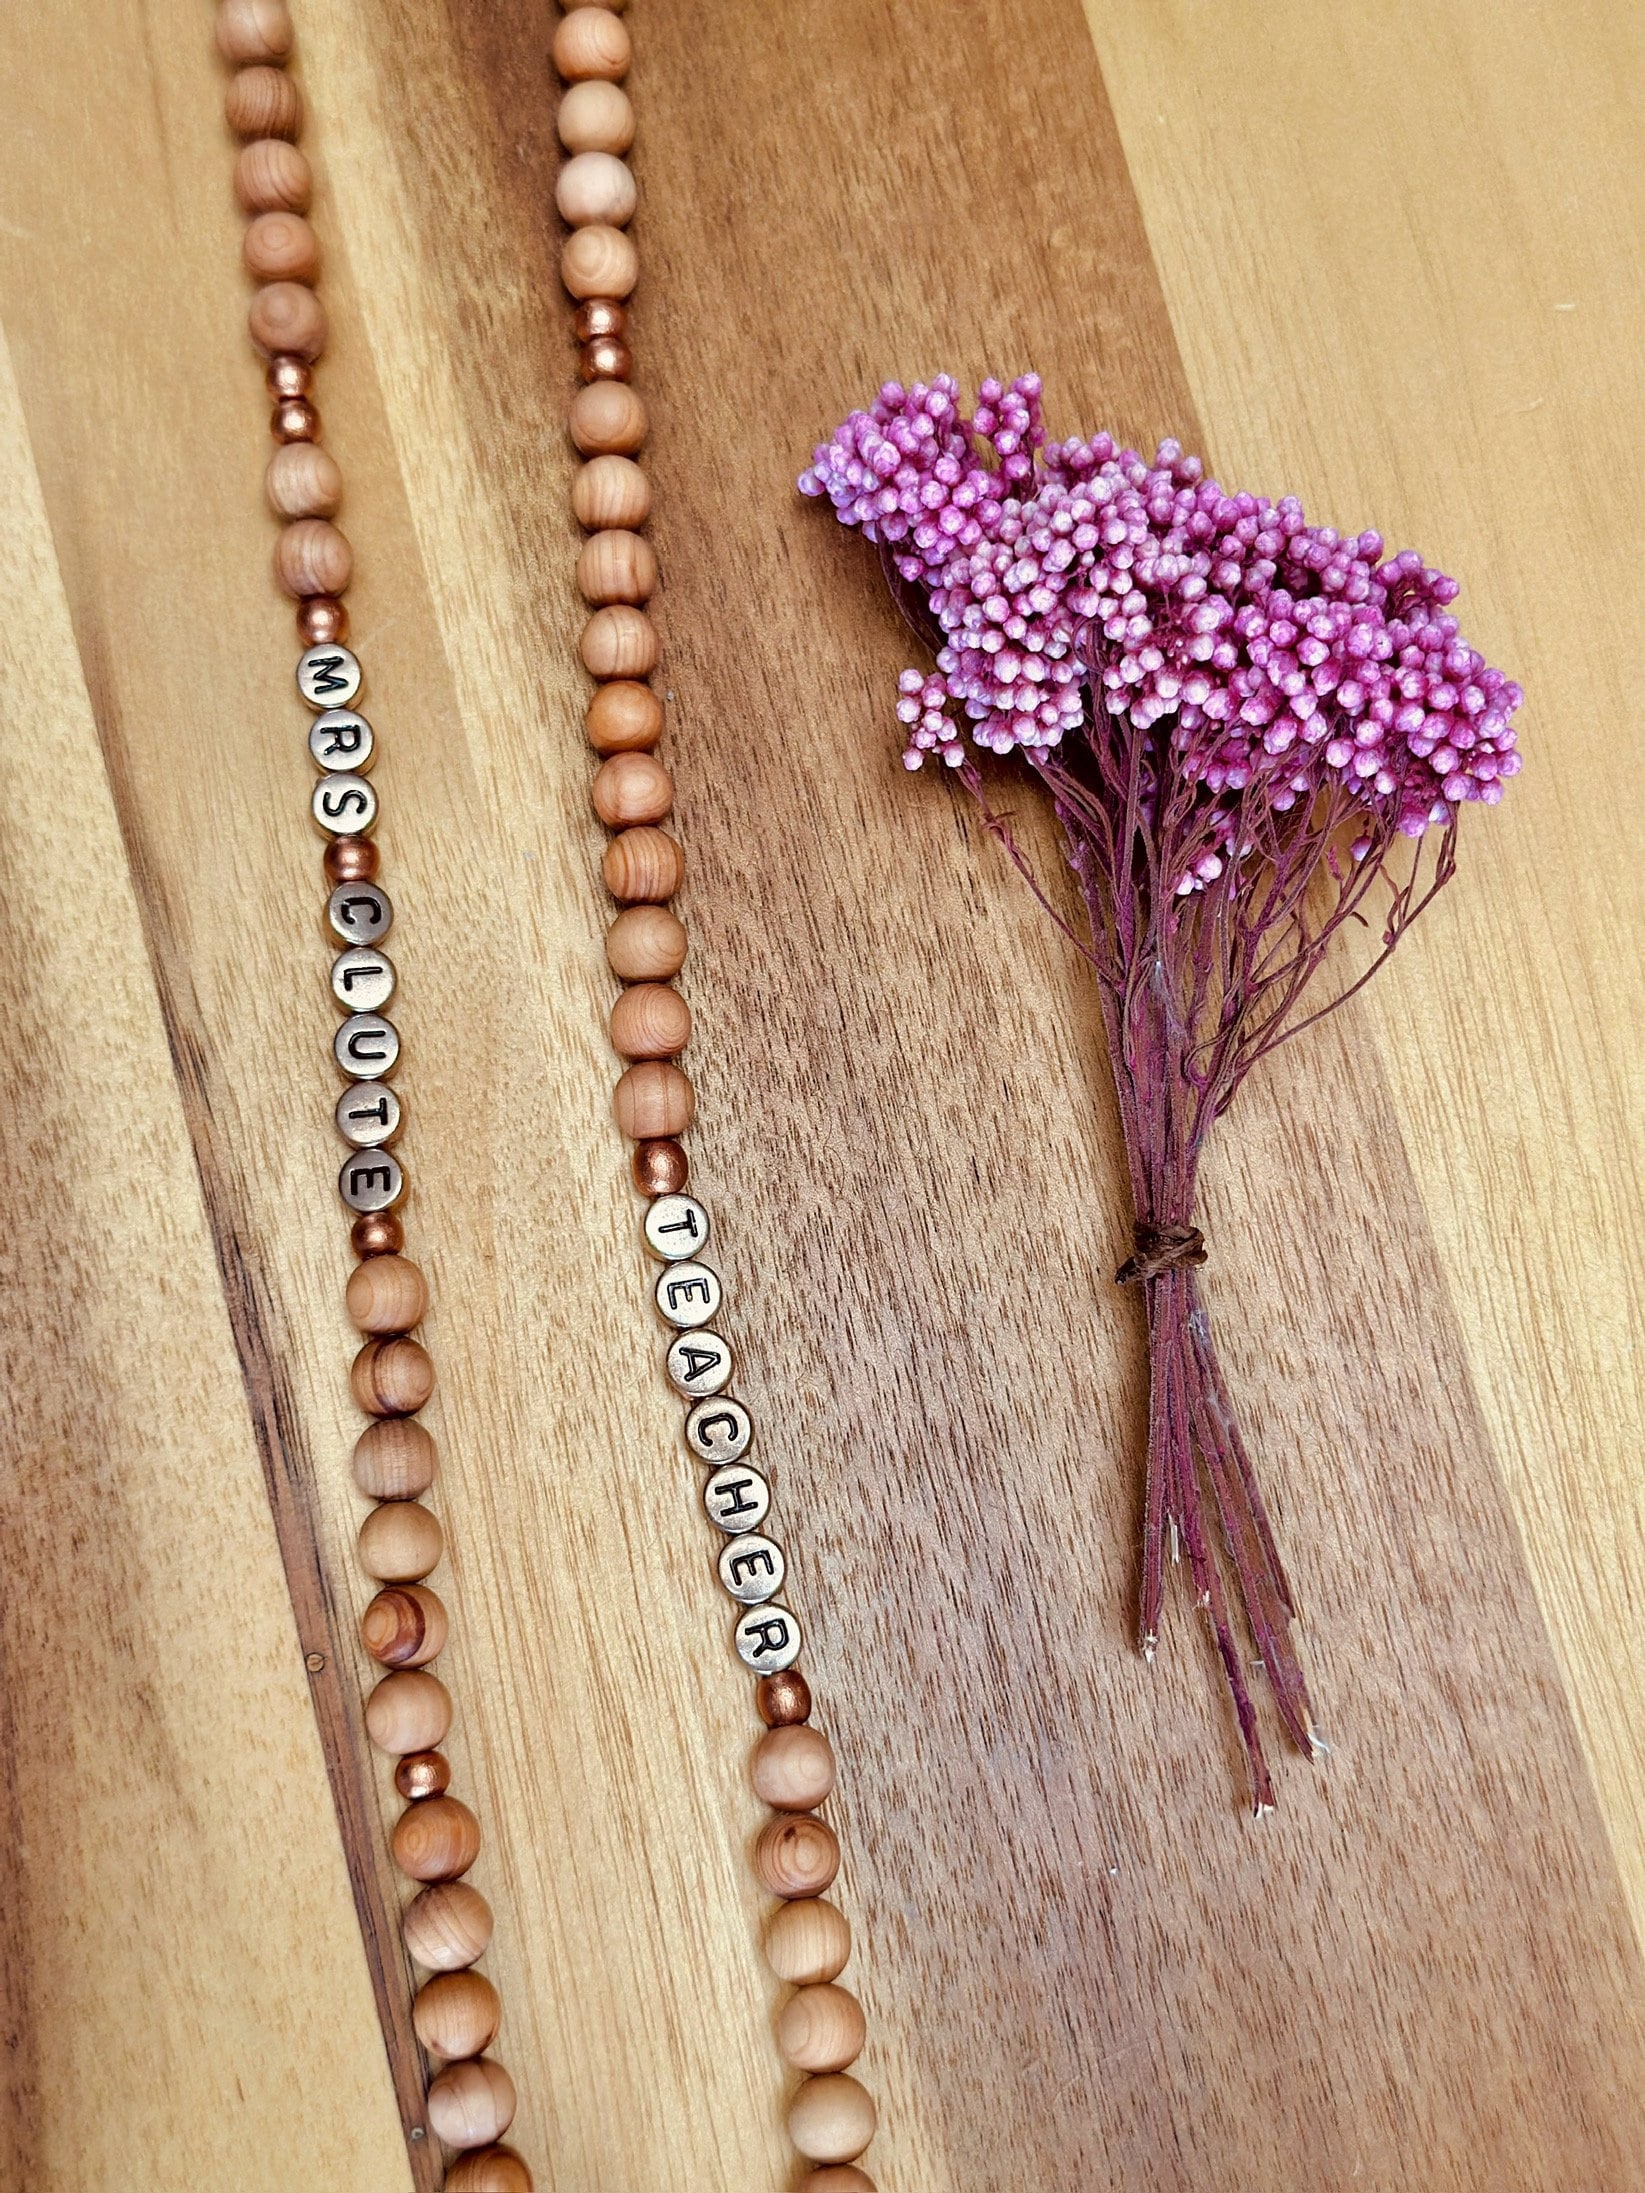 Personalized lanyard with crystal beads rose gold clasp customize letter bead lanyard for teachers ID badge holder nurses wood beaded gift